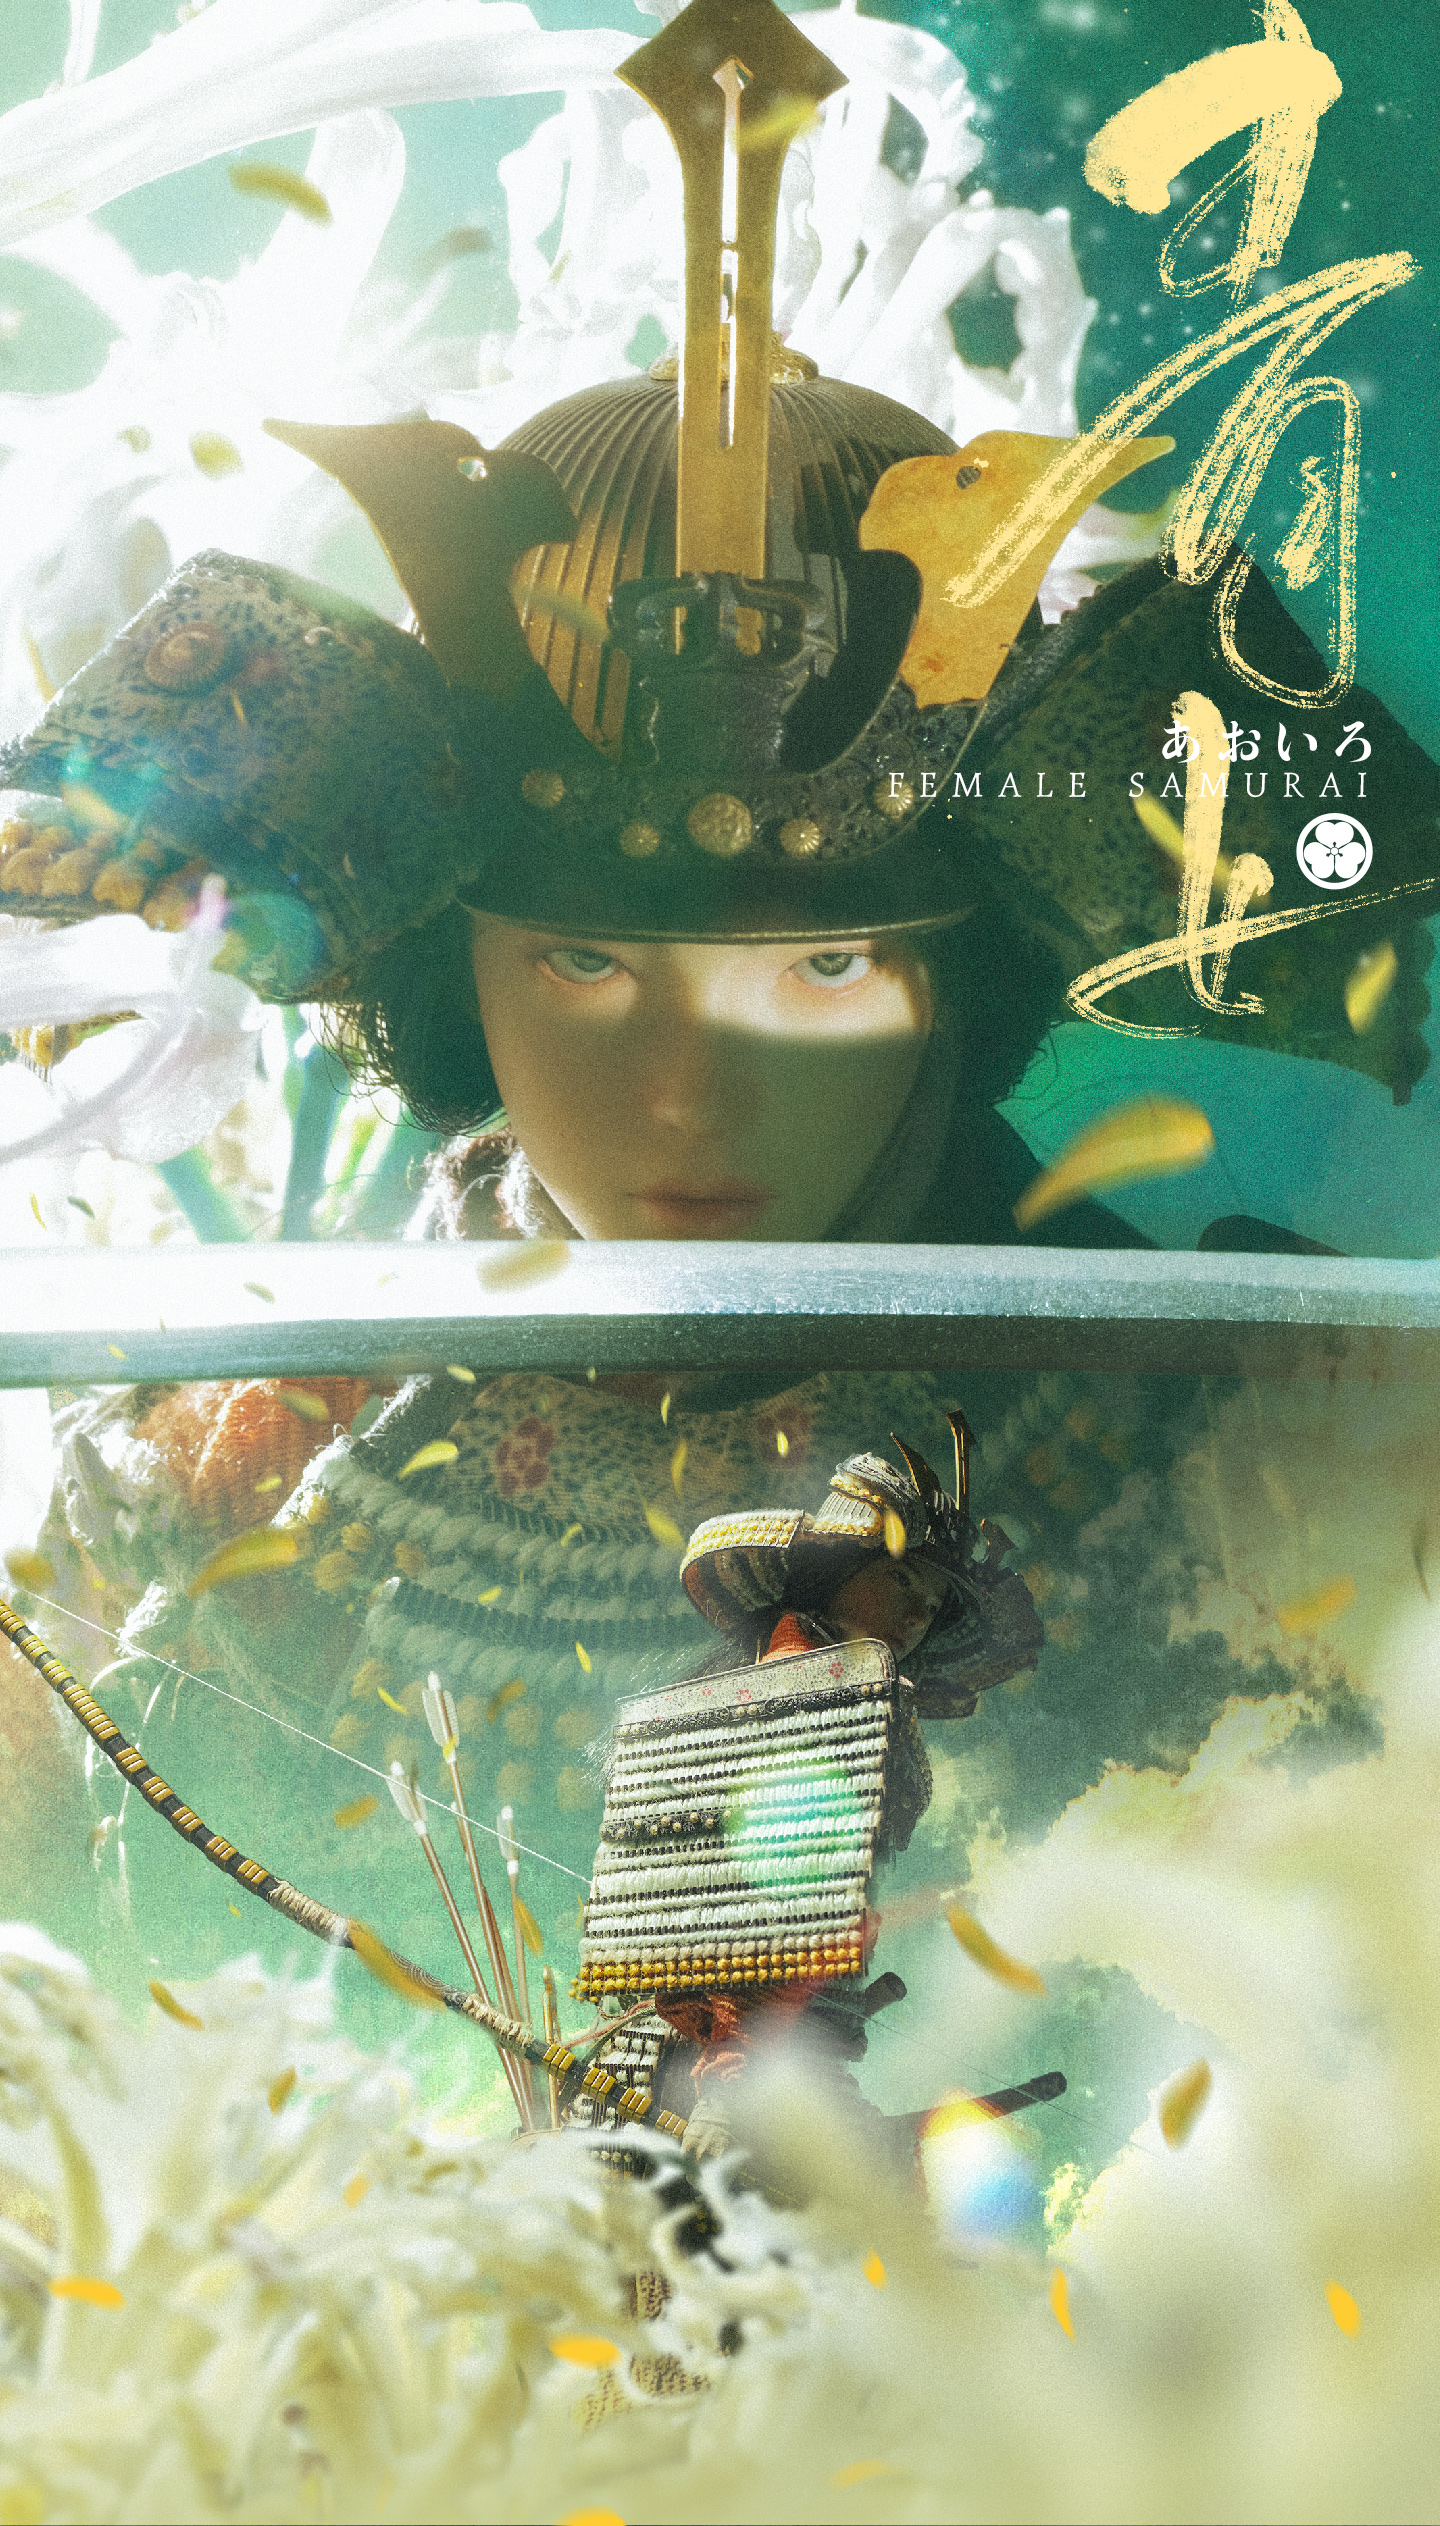 JPT design X POP COSTUME launch 1/6 scale manual Japanese style armor figure—Qingnv